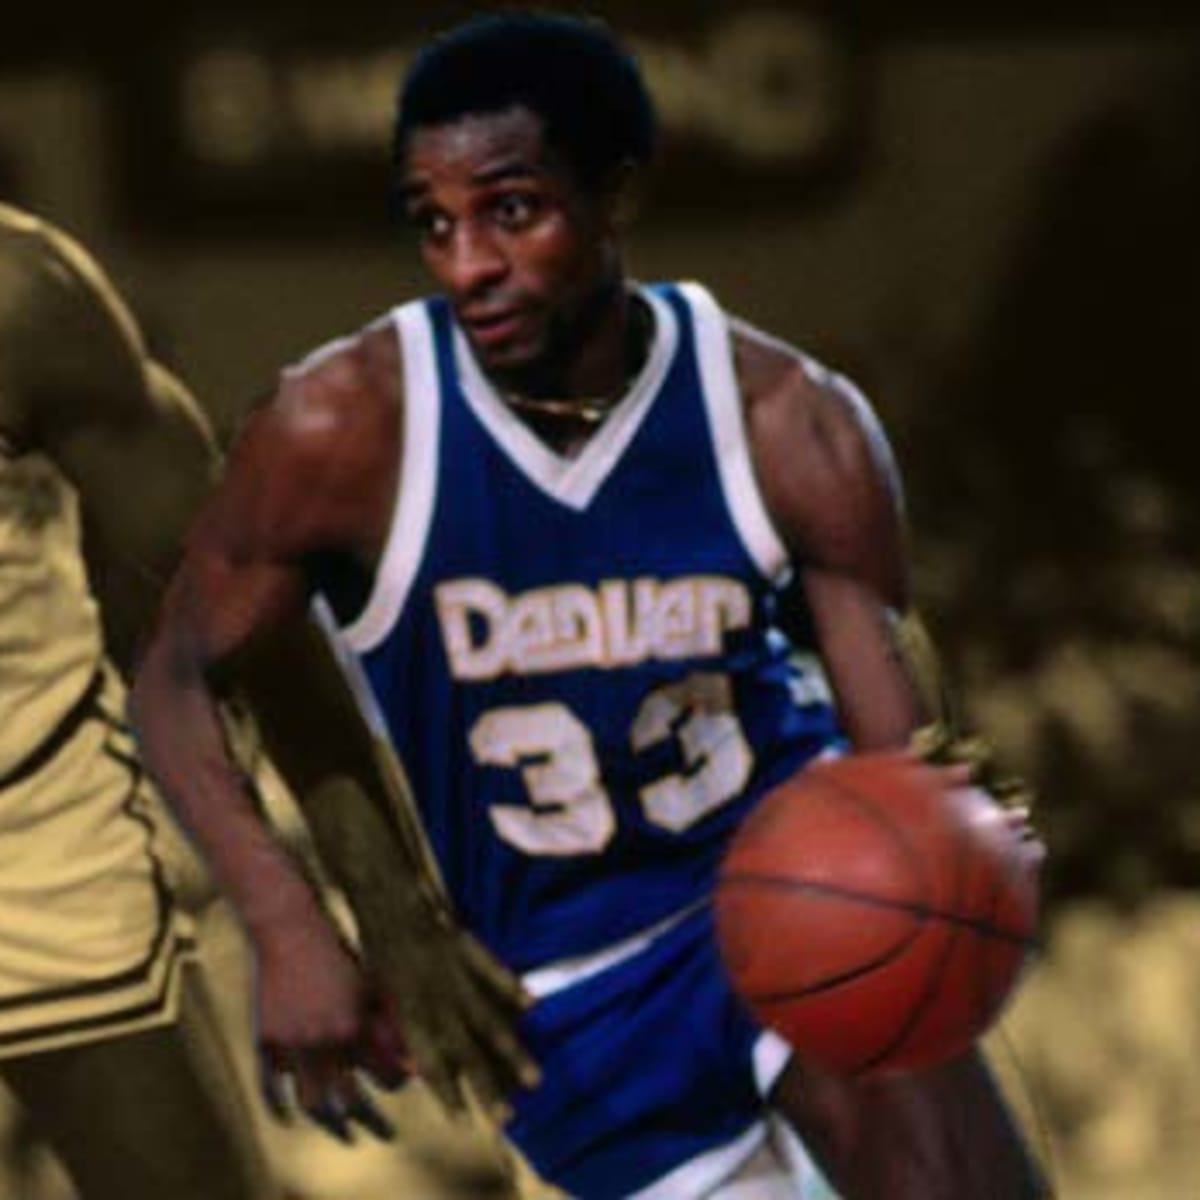 Best 1970s Basketball Players